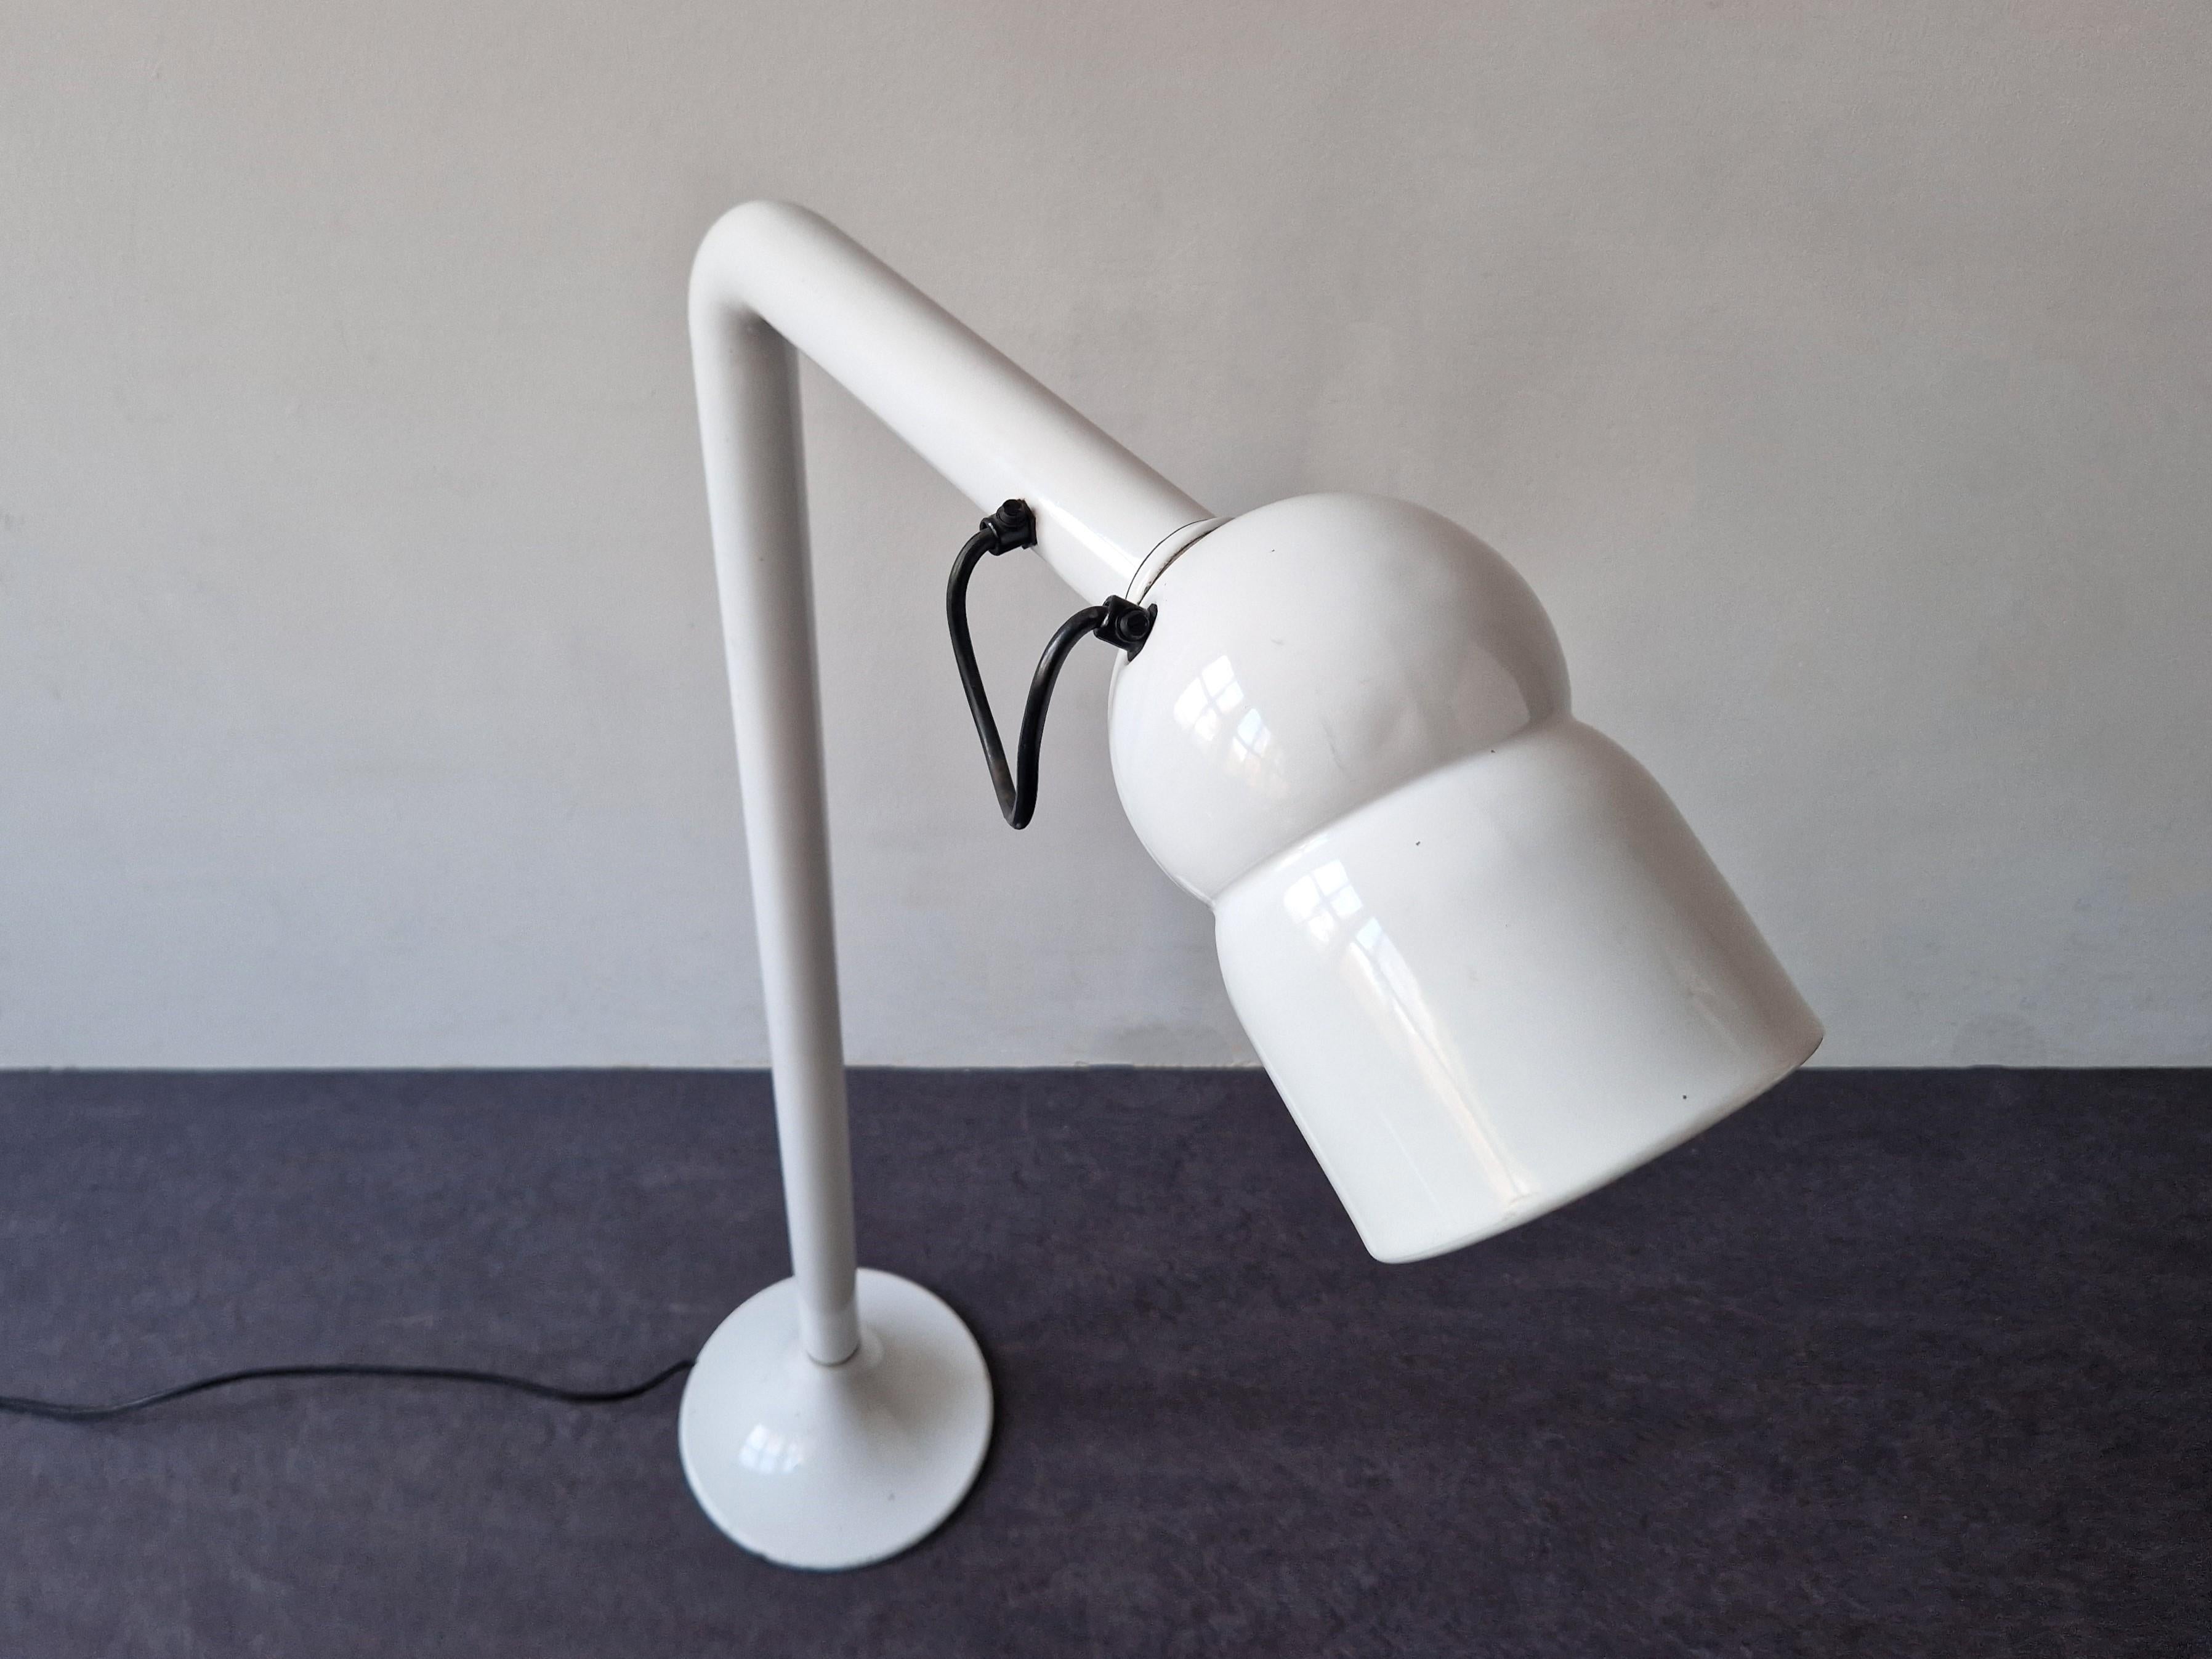 Italian 'Robot' floor lamp by Elio Martinelli for Martinelli Luce, Italy 1960's